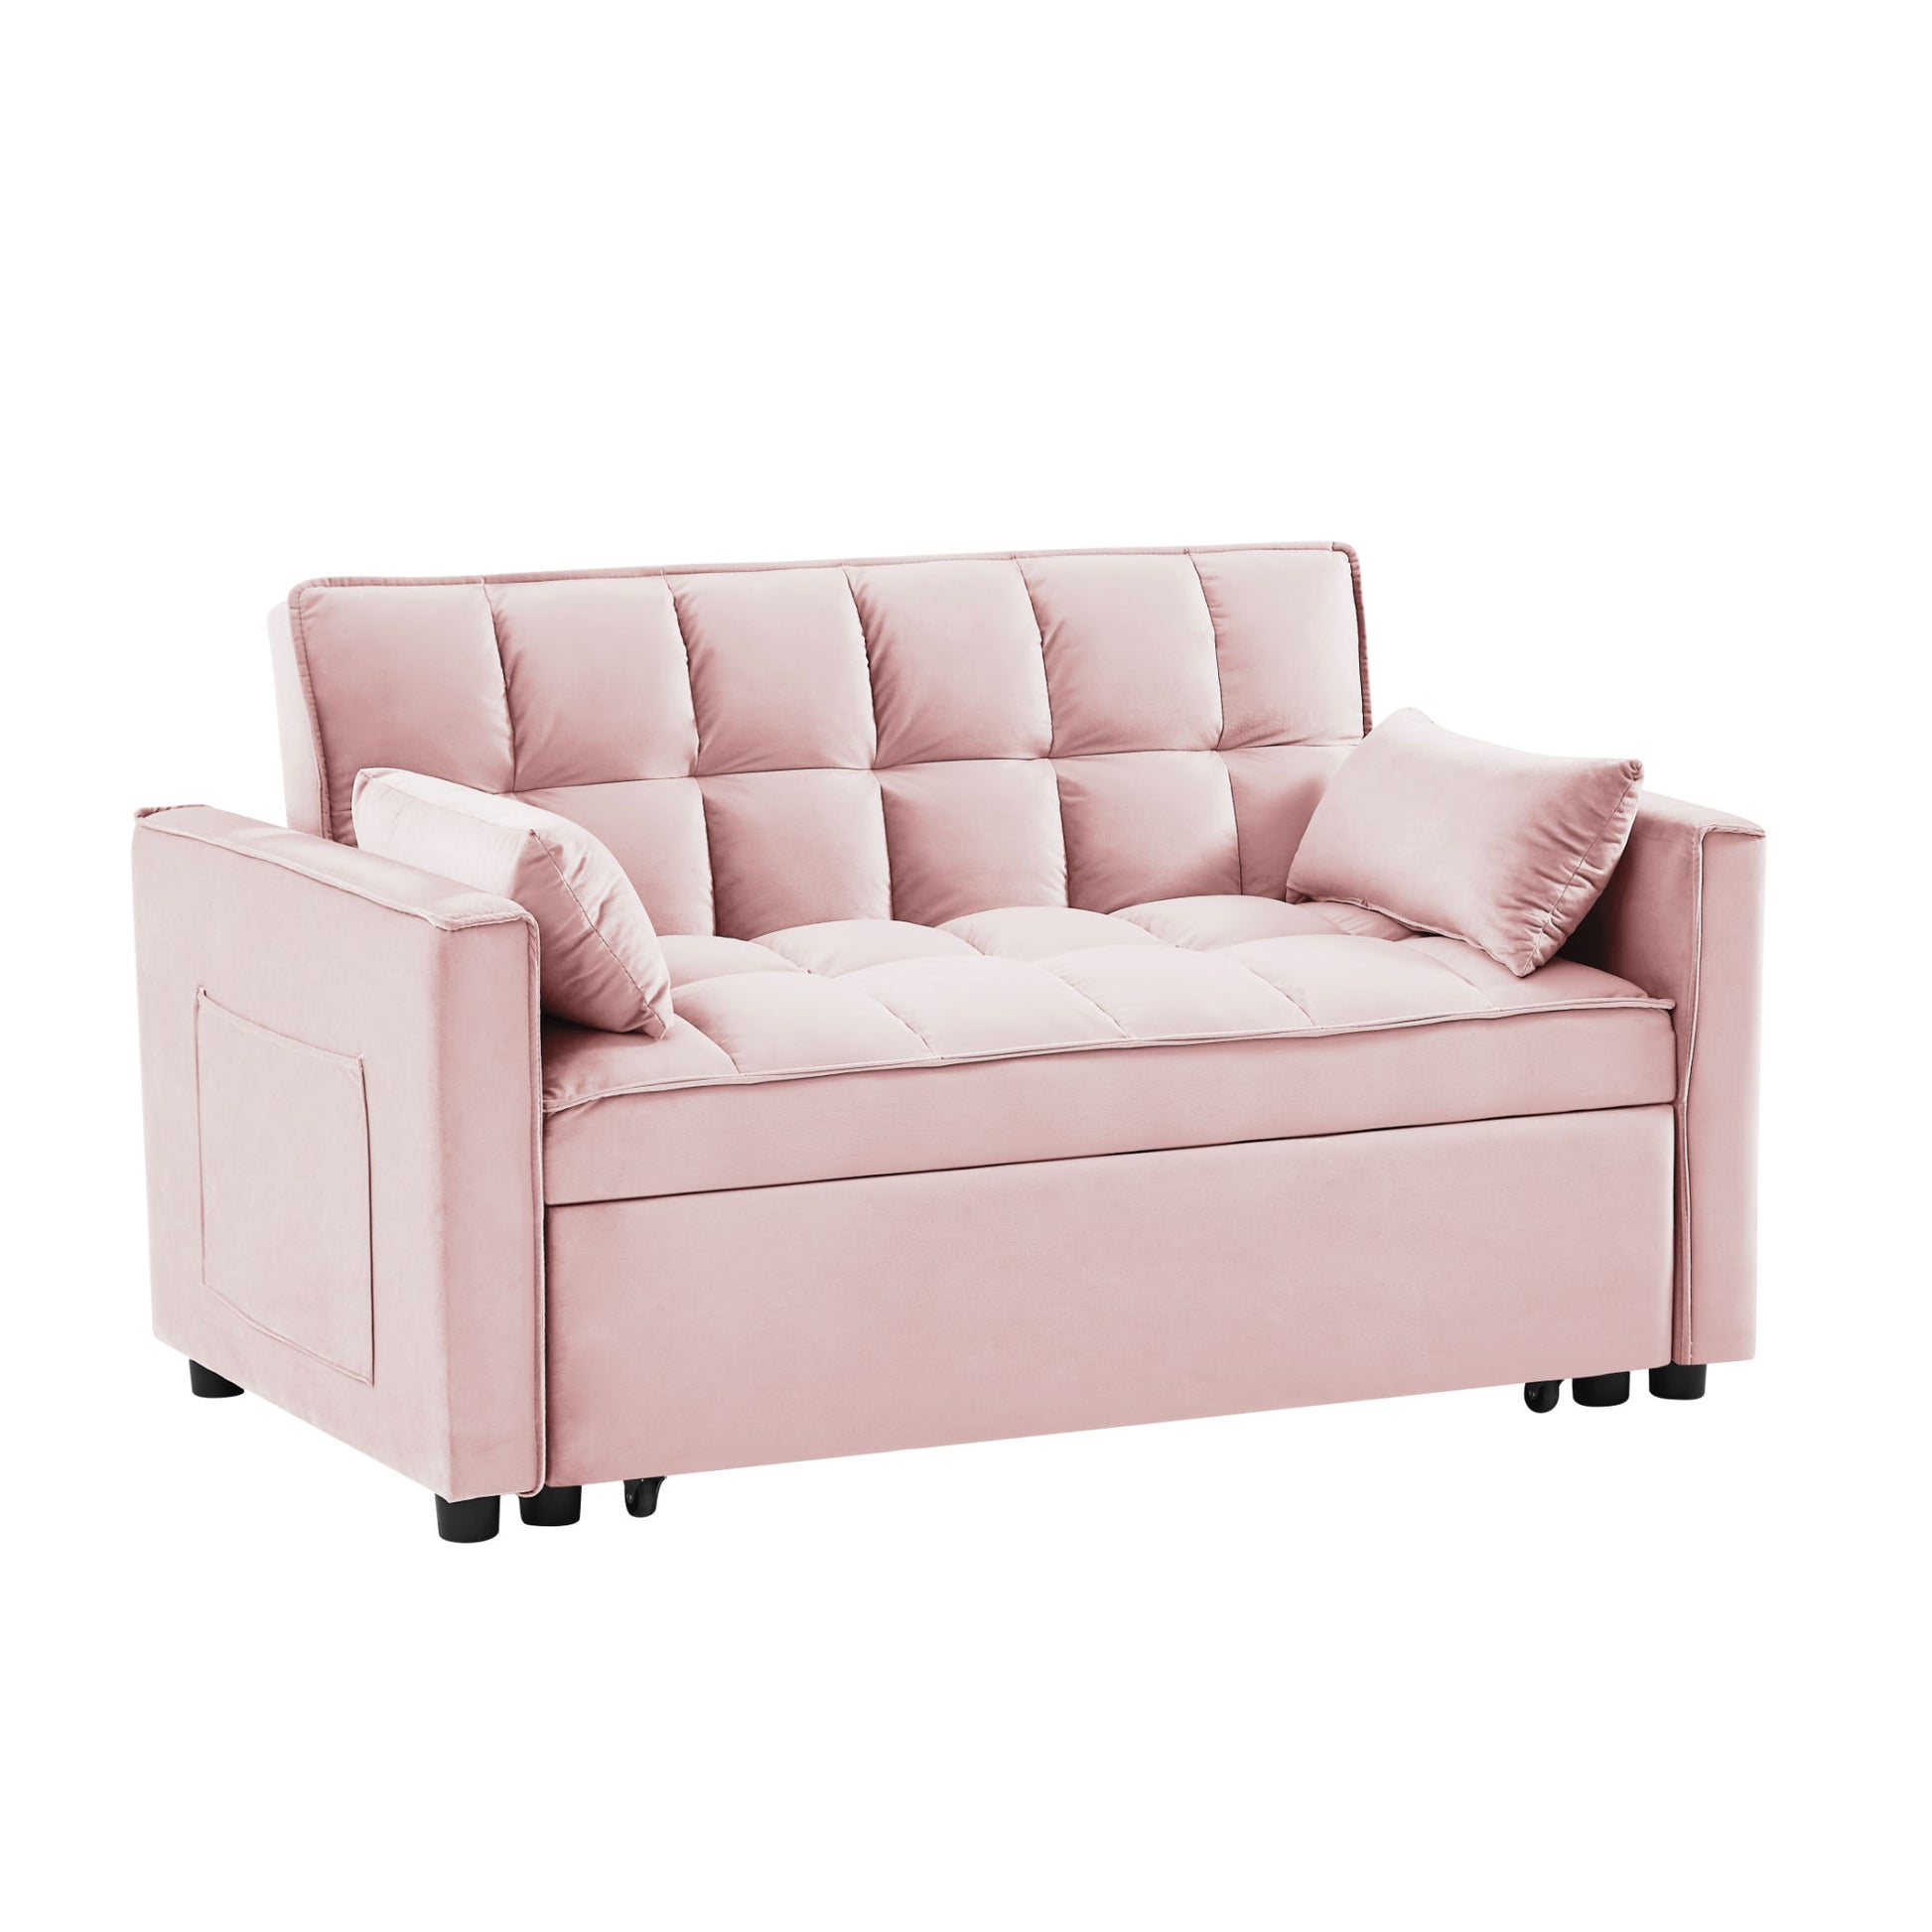 "Modern pink velvet loveseat futon sofa couch with pullout bed, reclining backrest, toss pillows, and side pockets, ideal for living rooms as a 3-in-1 convertible sleeper sofa bed."